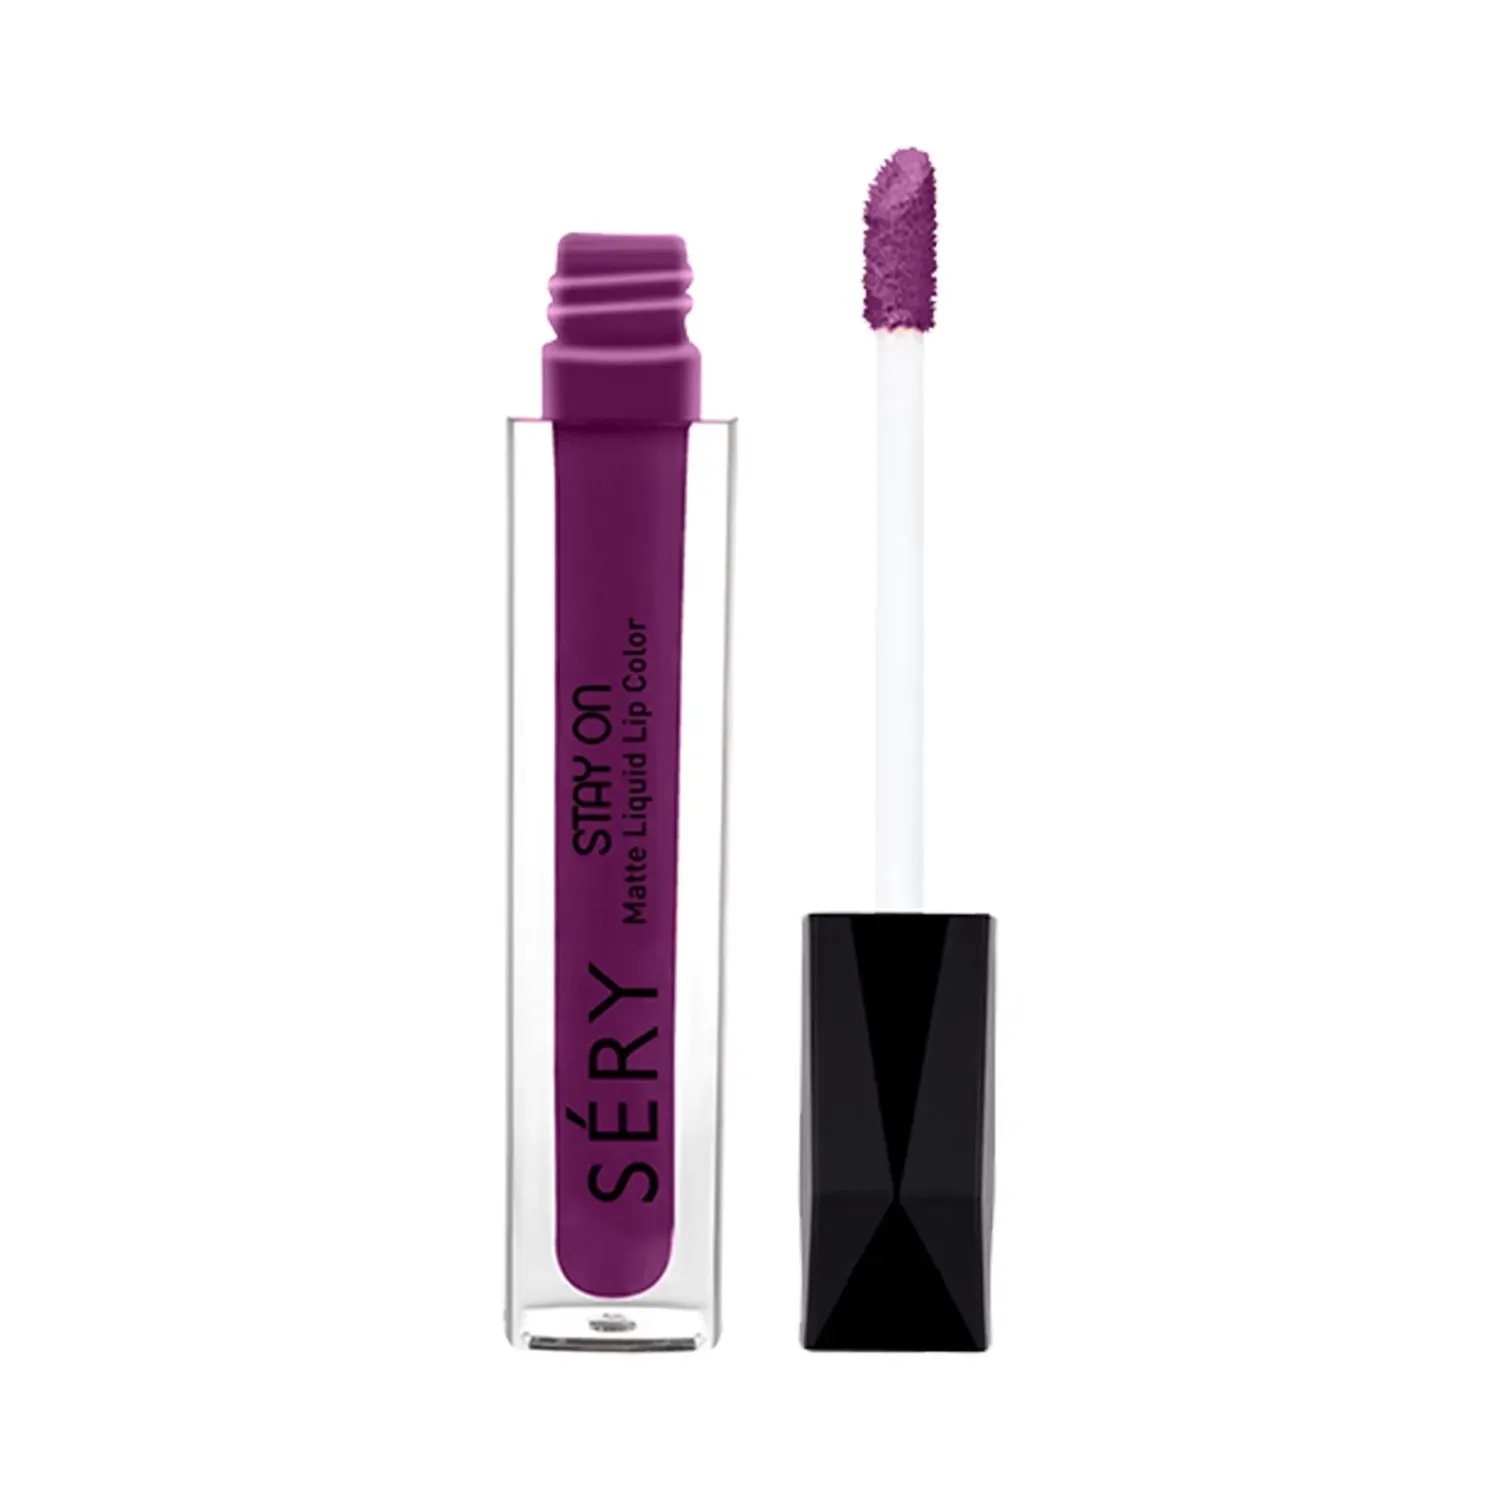 Sery | Sery Stay On Liquid Matte Lip Color - Sagria Pout LSO-15 (5ml)